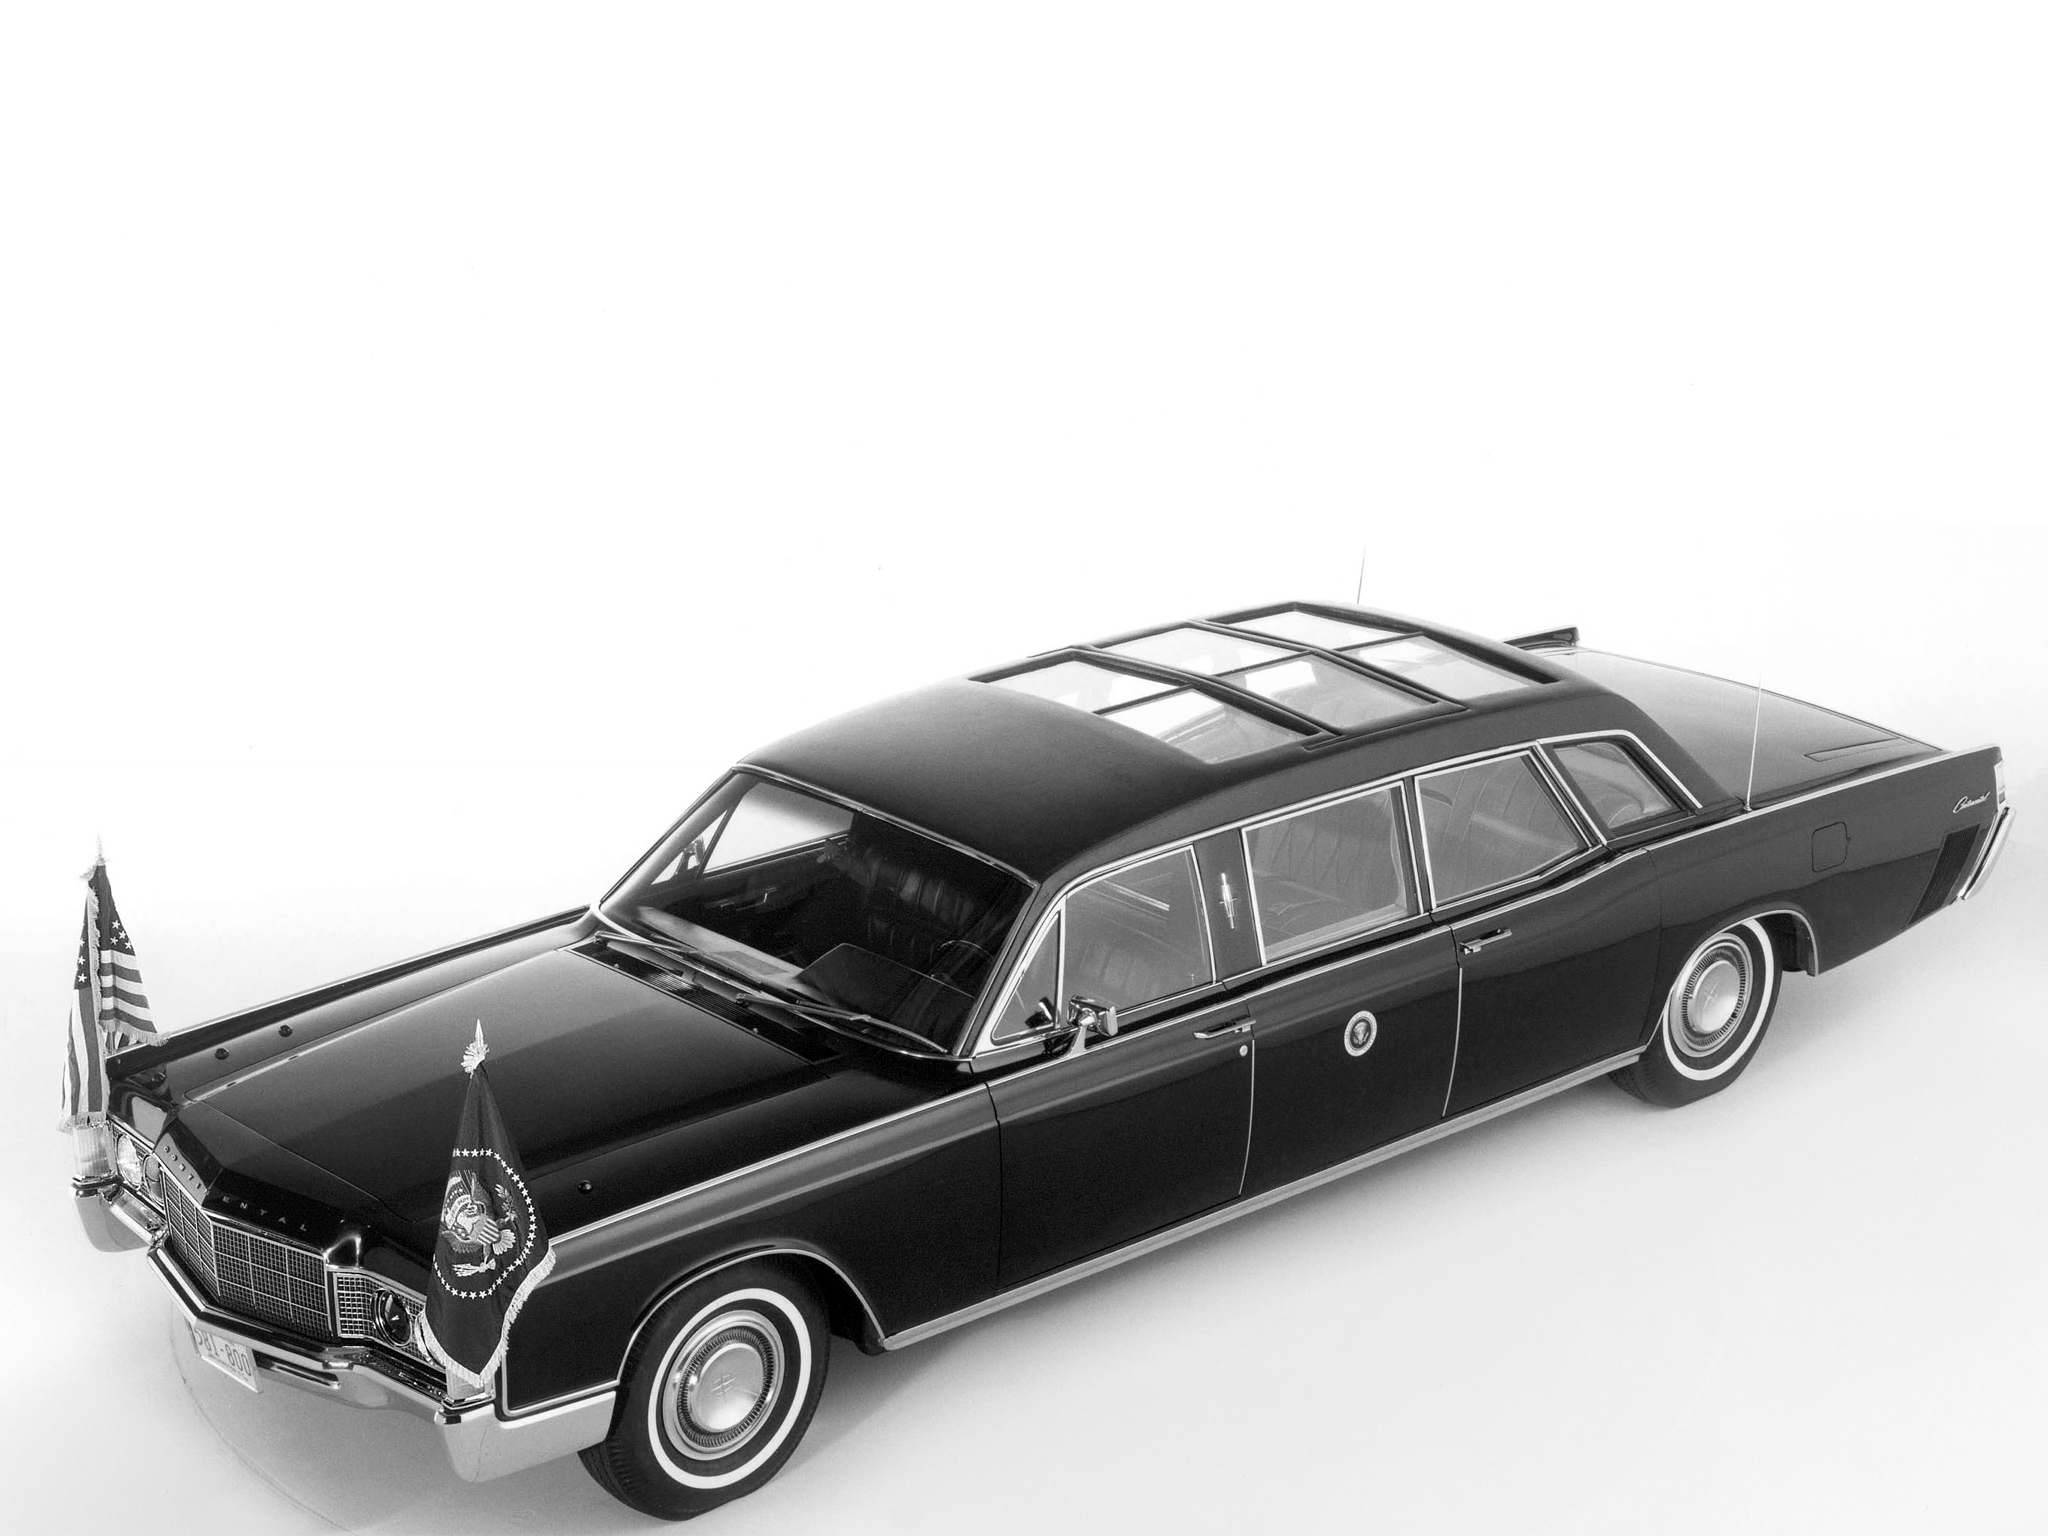 1969, Armored, Lincoln, Continental, Presidential, Limousine, Classic, Luxury Wallpaper